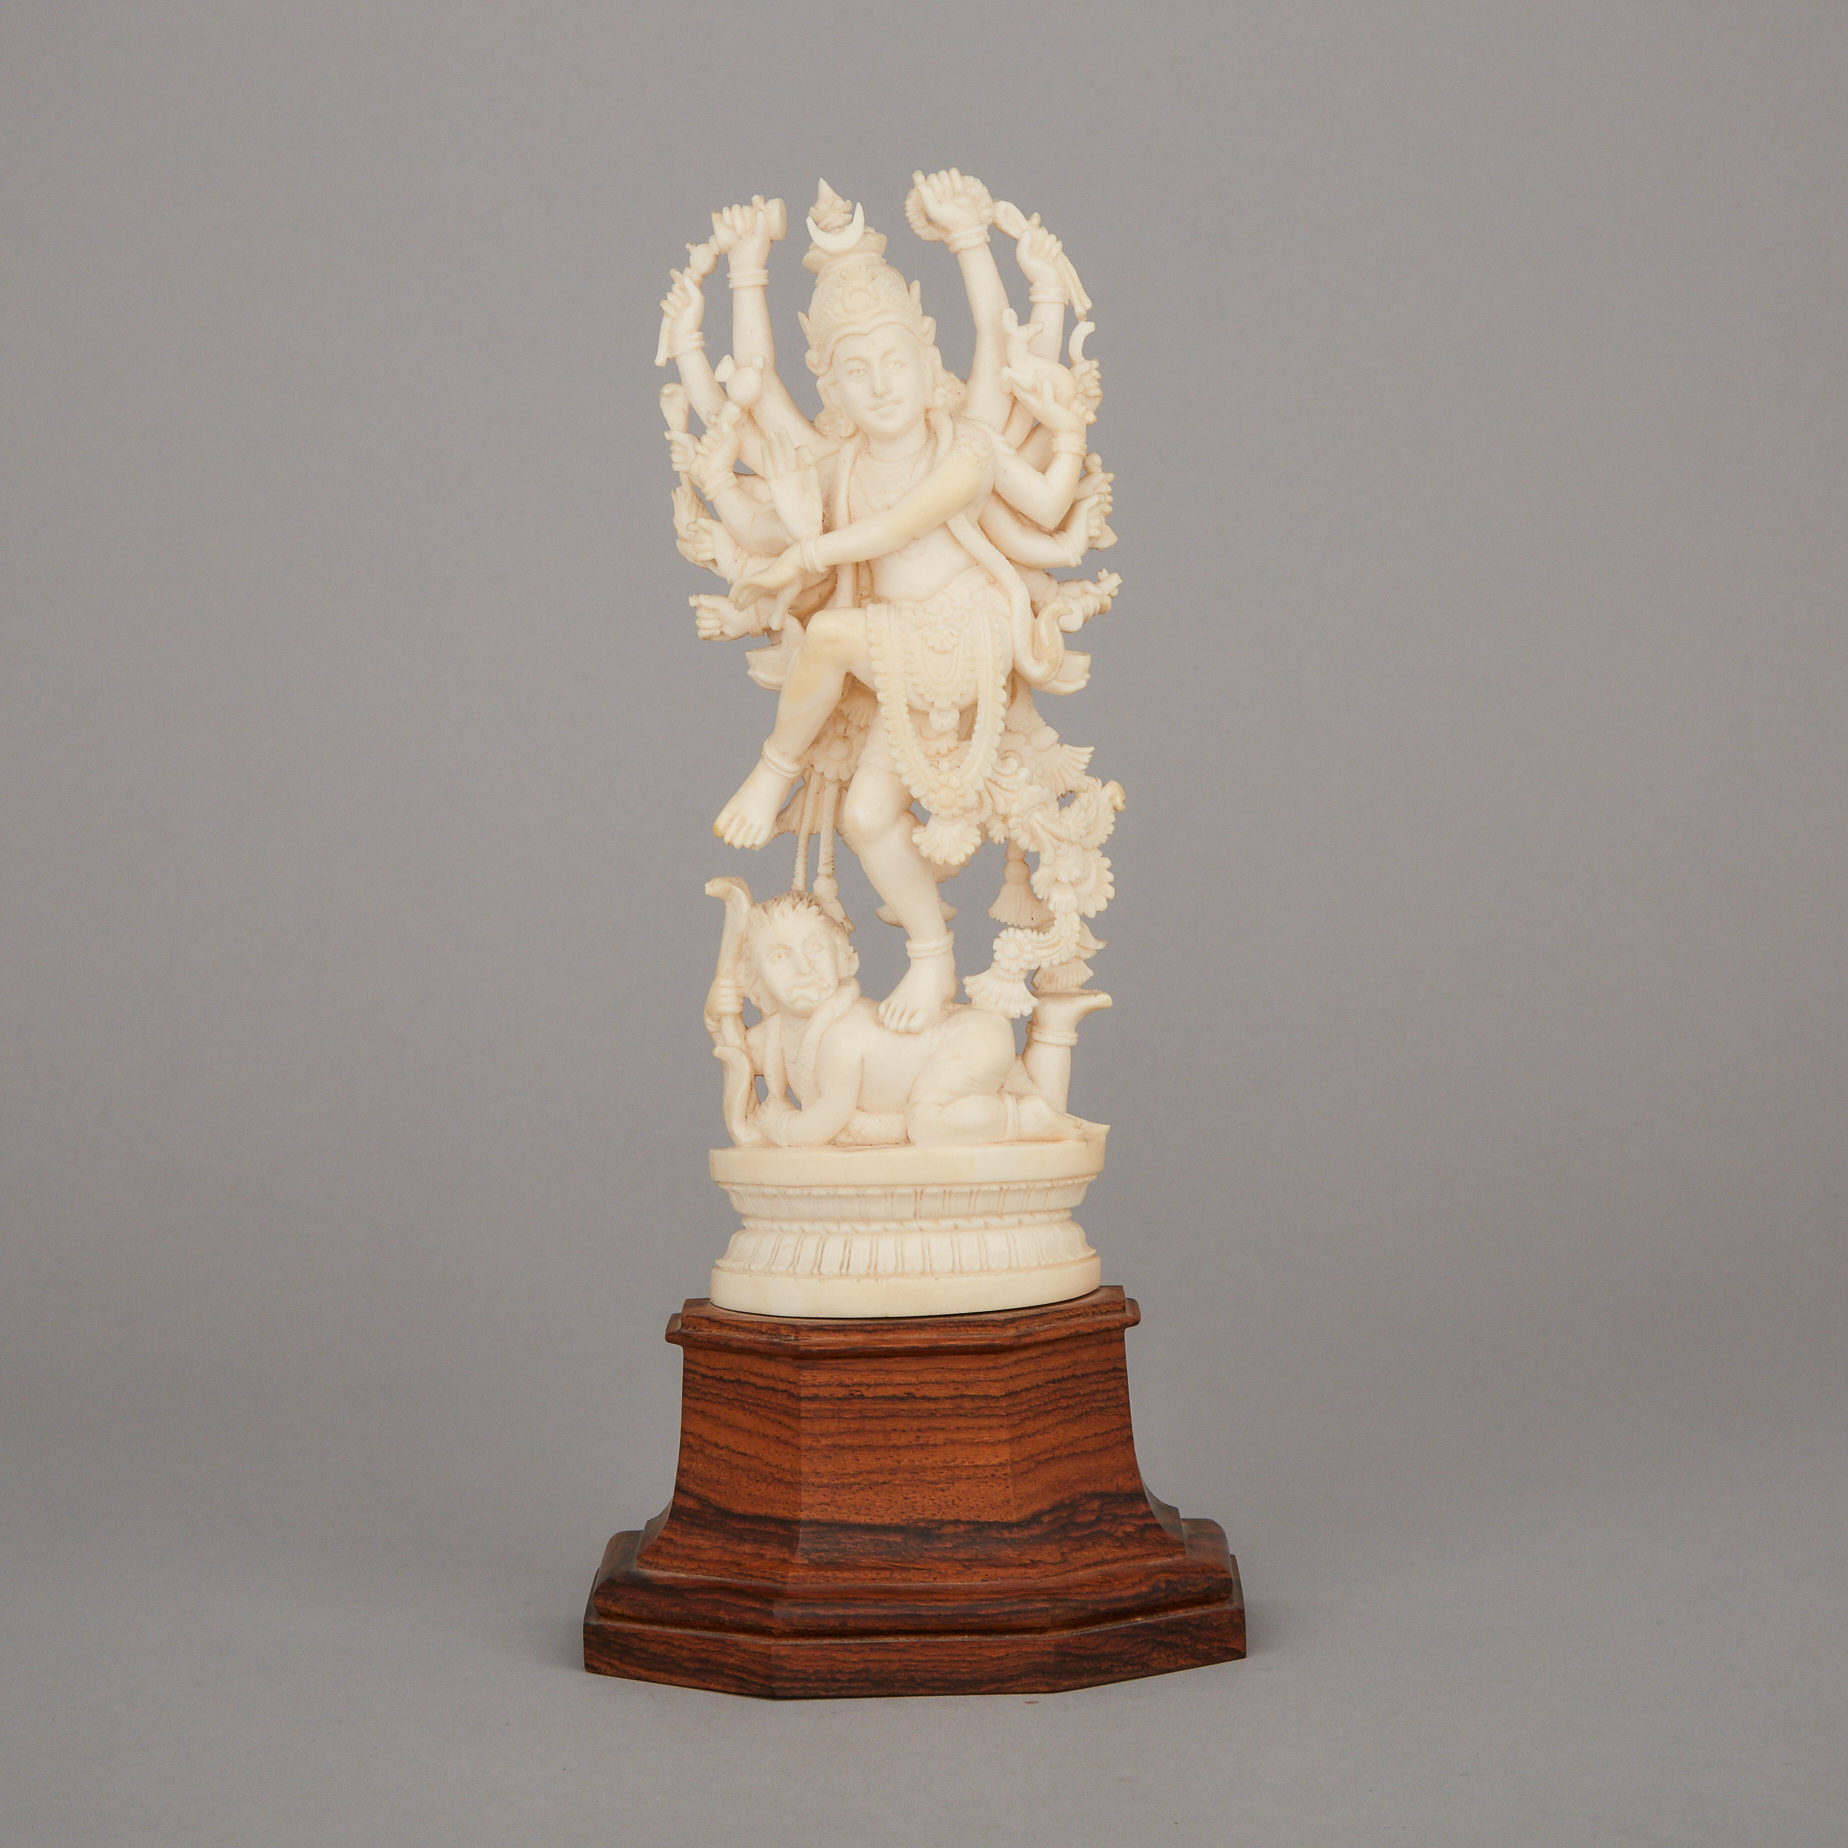 An Ivory Carved Figure of Shiva, Mid-20th Century